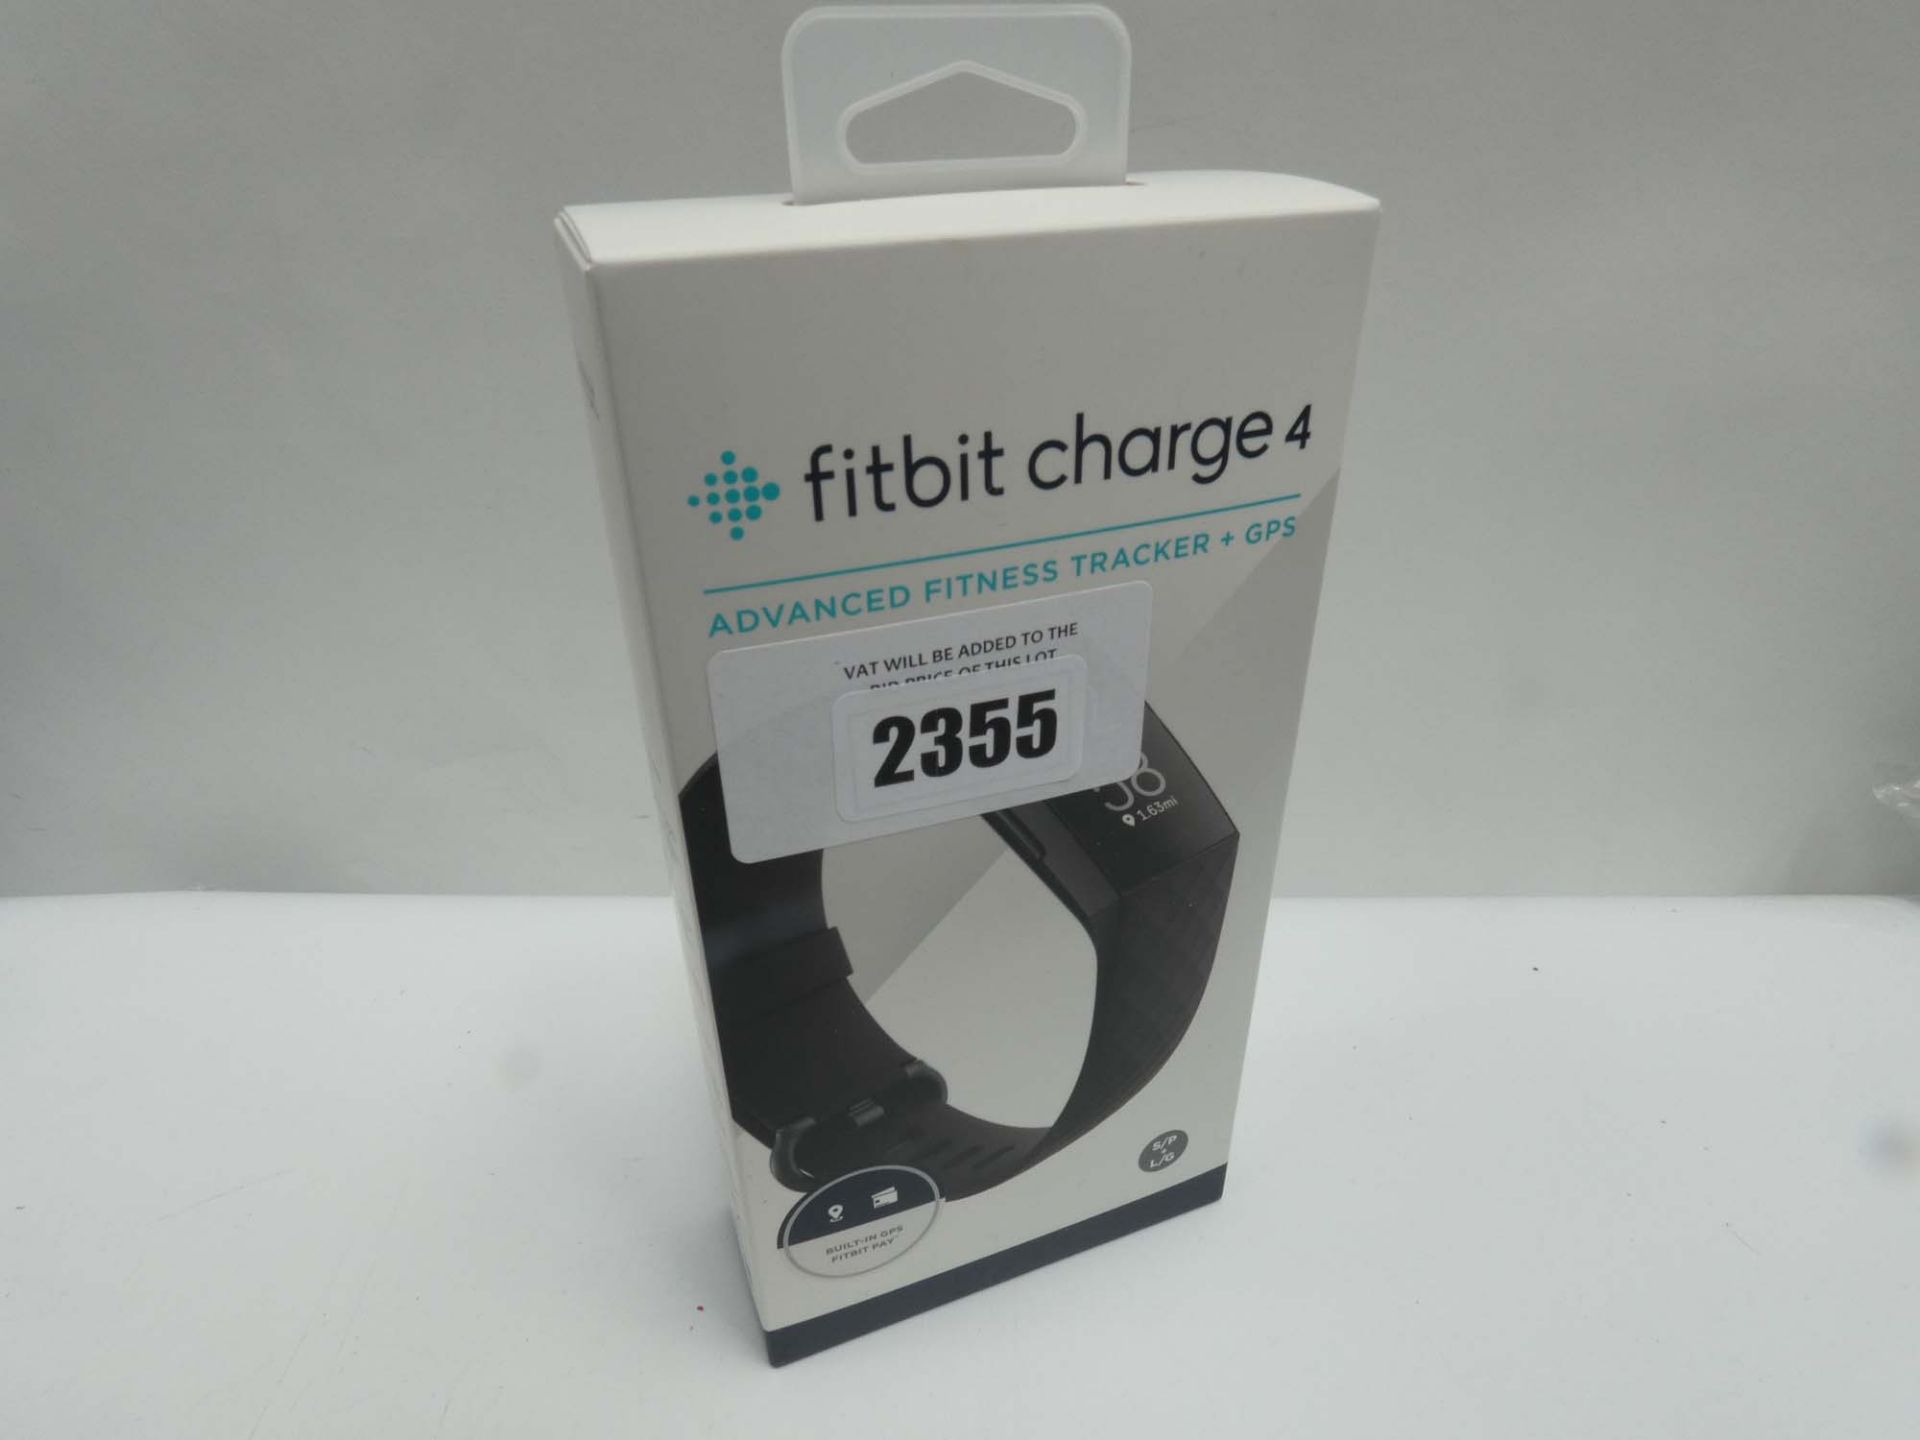 Fitbit Charge 4 advanced fitness tracker